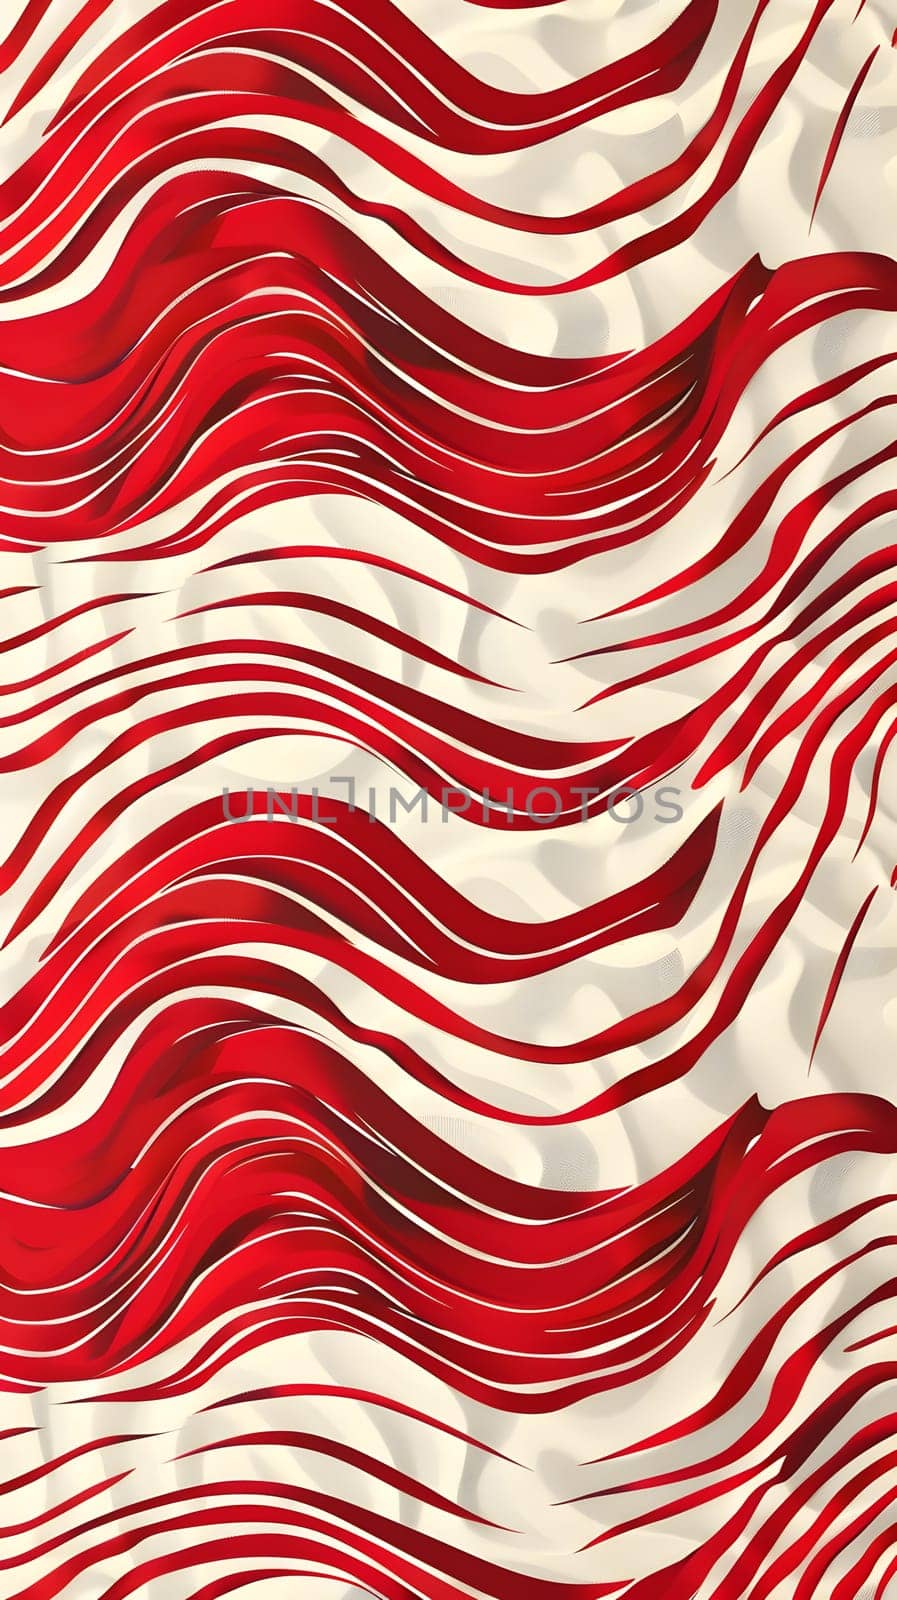 Fluid red and white waves pattern on white background, resembling the US flag by Nadtochiy